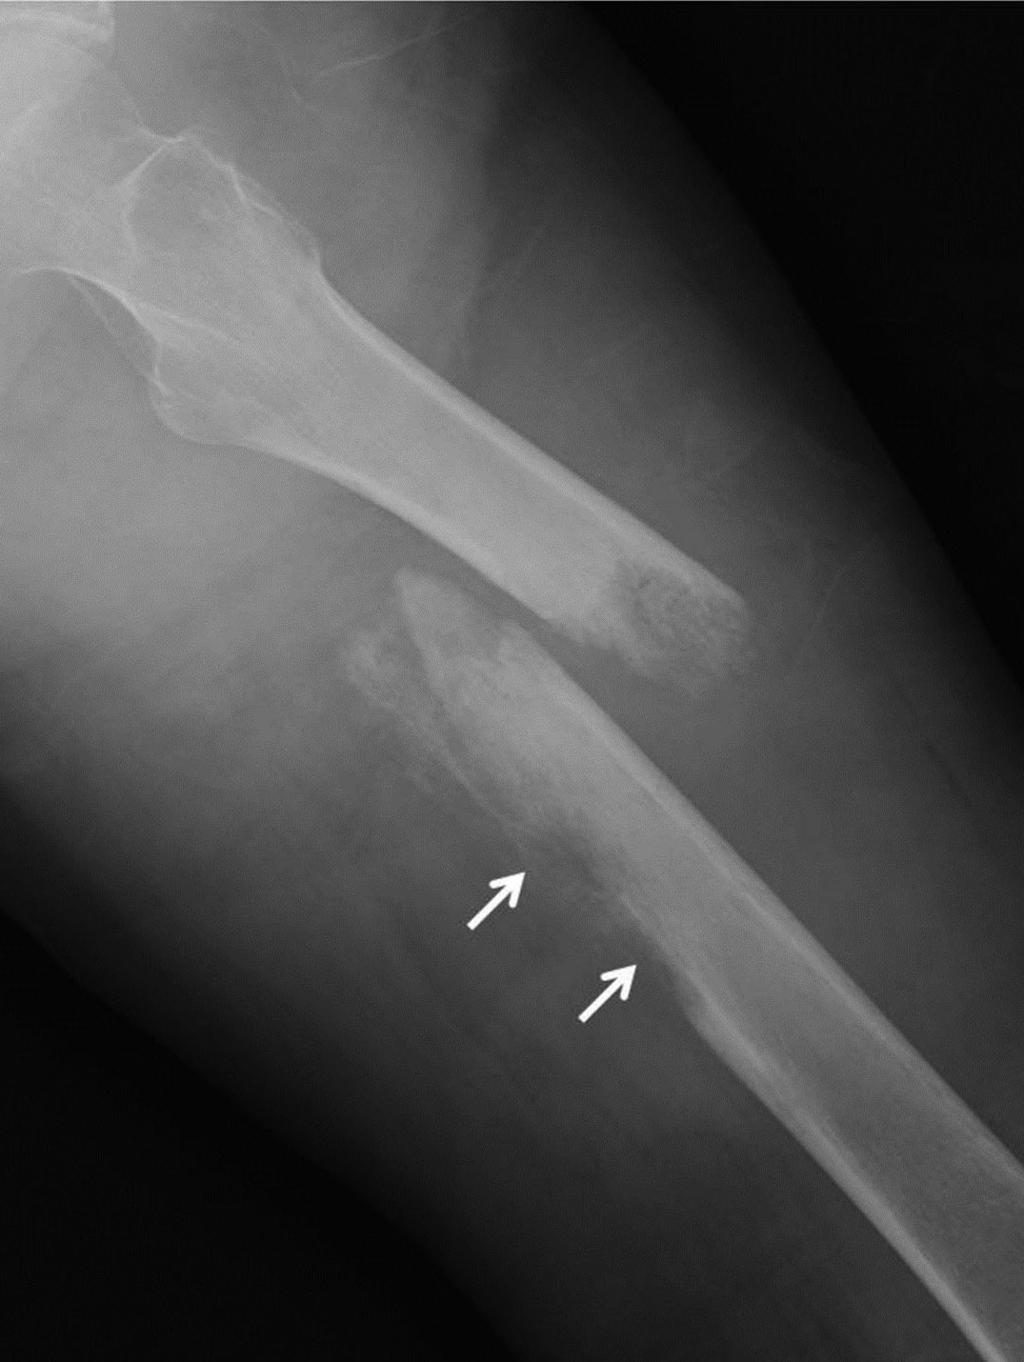 Bone Tumors with Fracture DISCUSSION Sarcoma is commonly associated with pathologic fracture, regardless of age, and this association is often related to a serious pathology (7, 8).